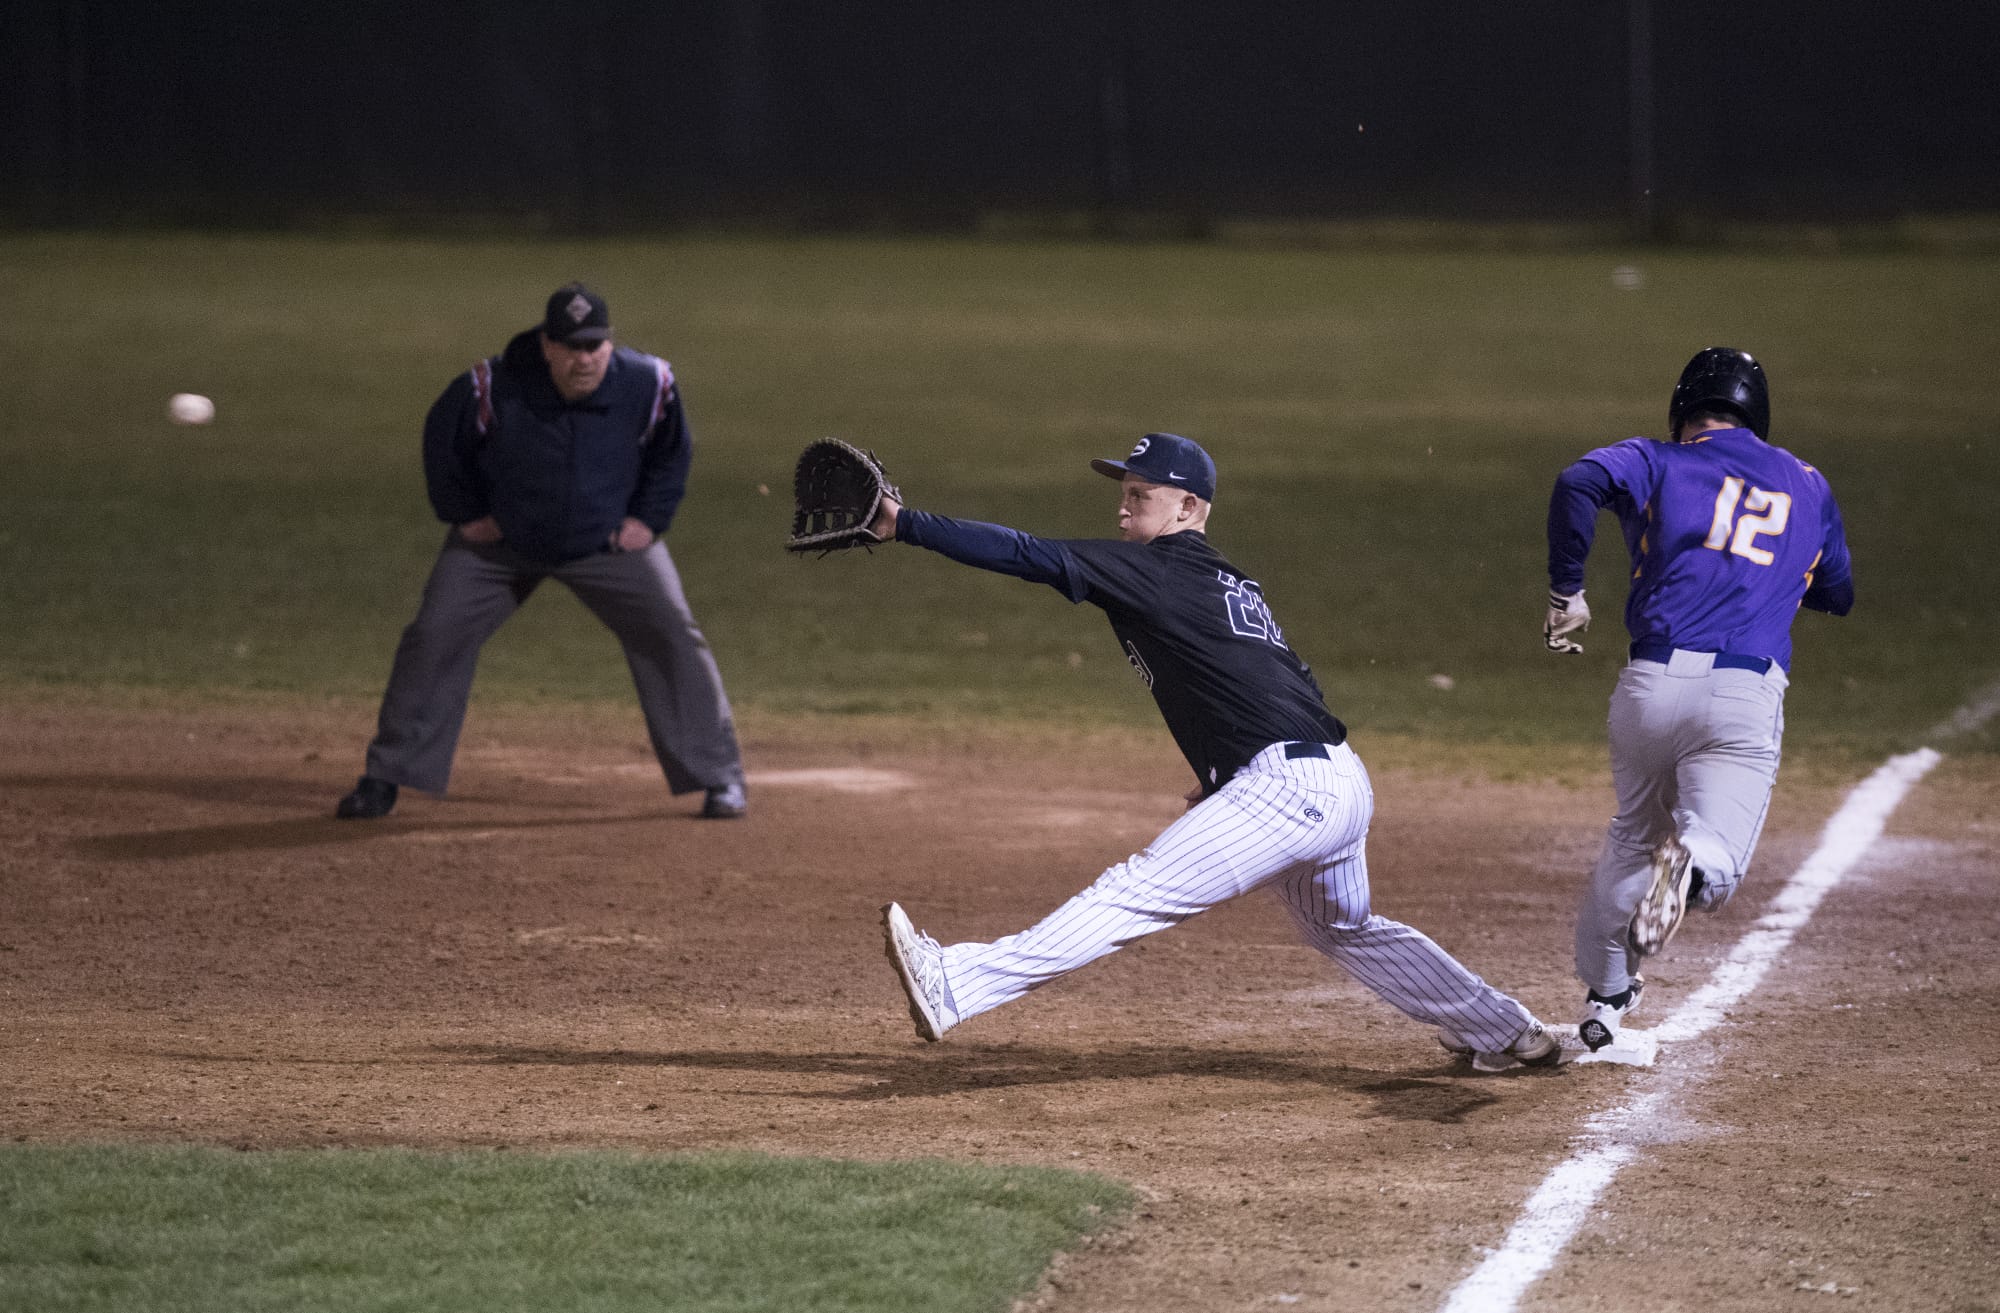 Skyview's Michael Lundgren (20) stretches forward for a catch to gain an out against Columbia River's Nick Nygard (12) as Nygard runs late into first during Friday night's game at Propstra Stadium in Vancouver on March 9, 2018. Columbia River won the season-opener 8-2.